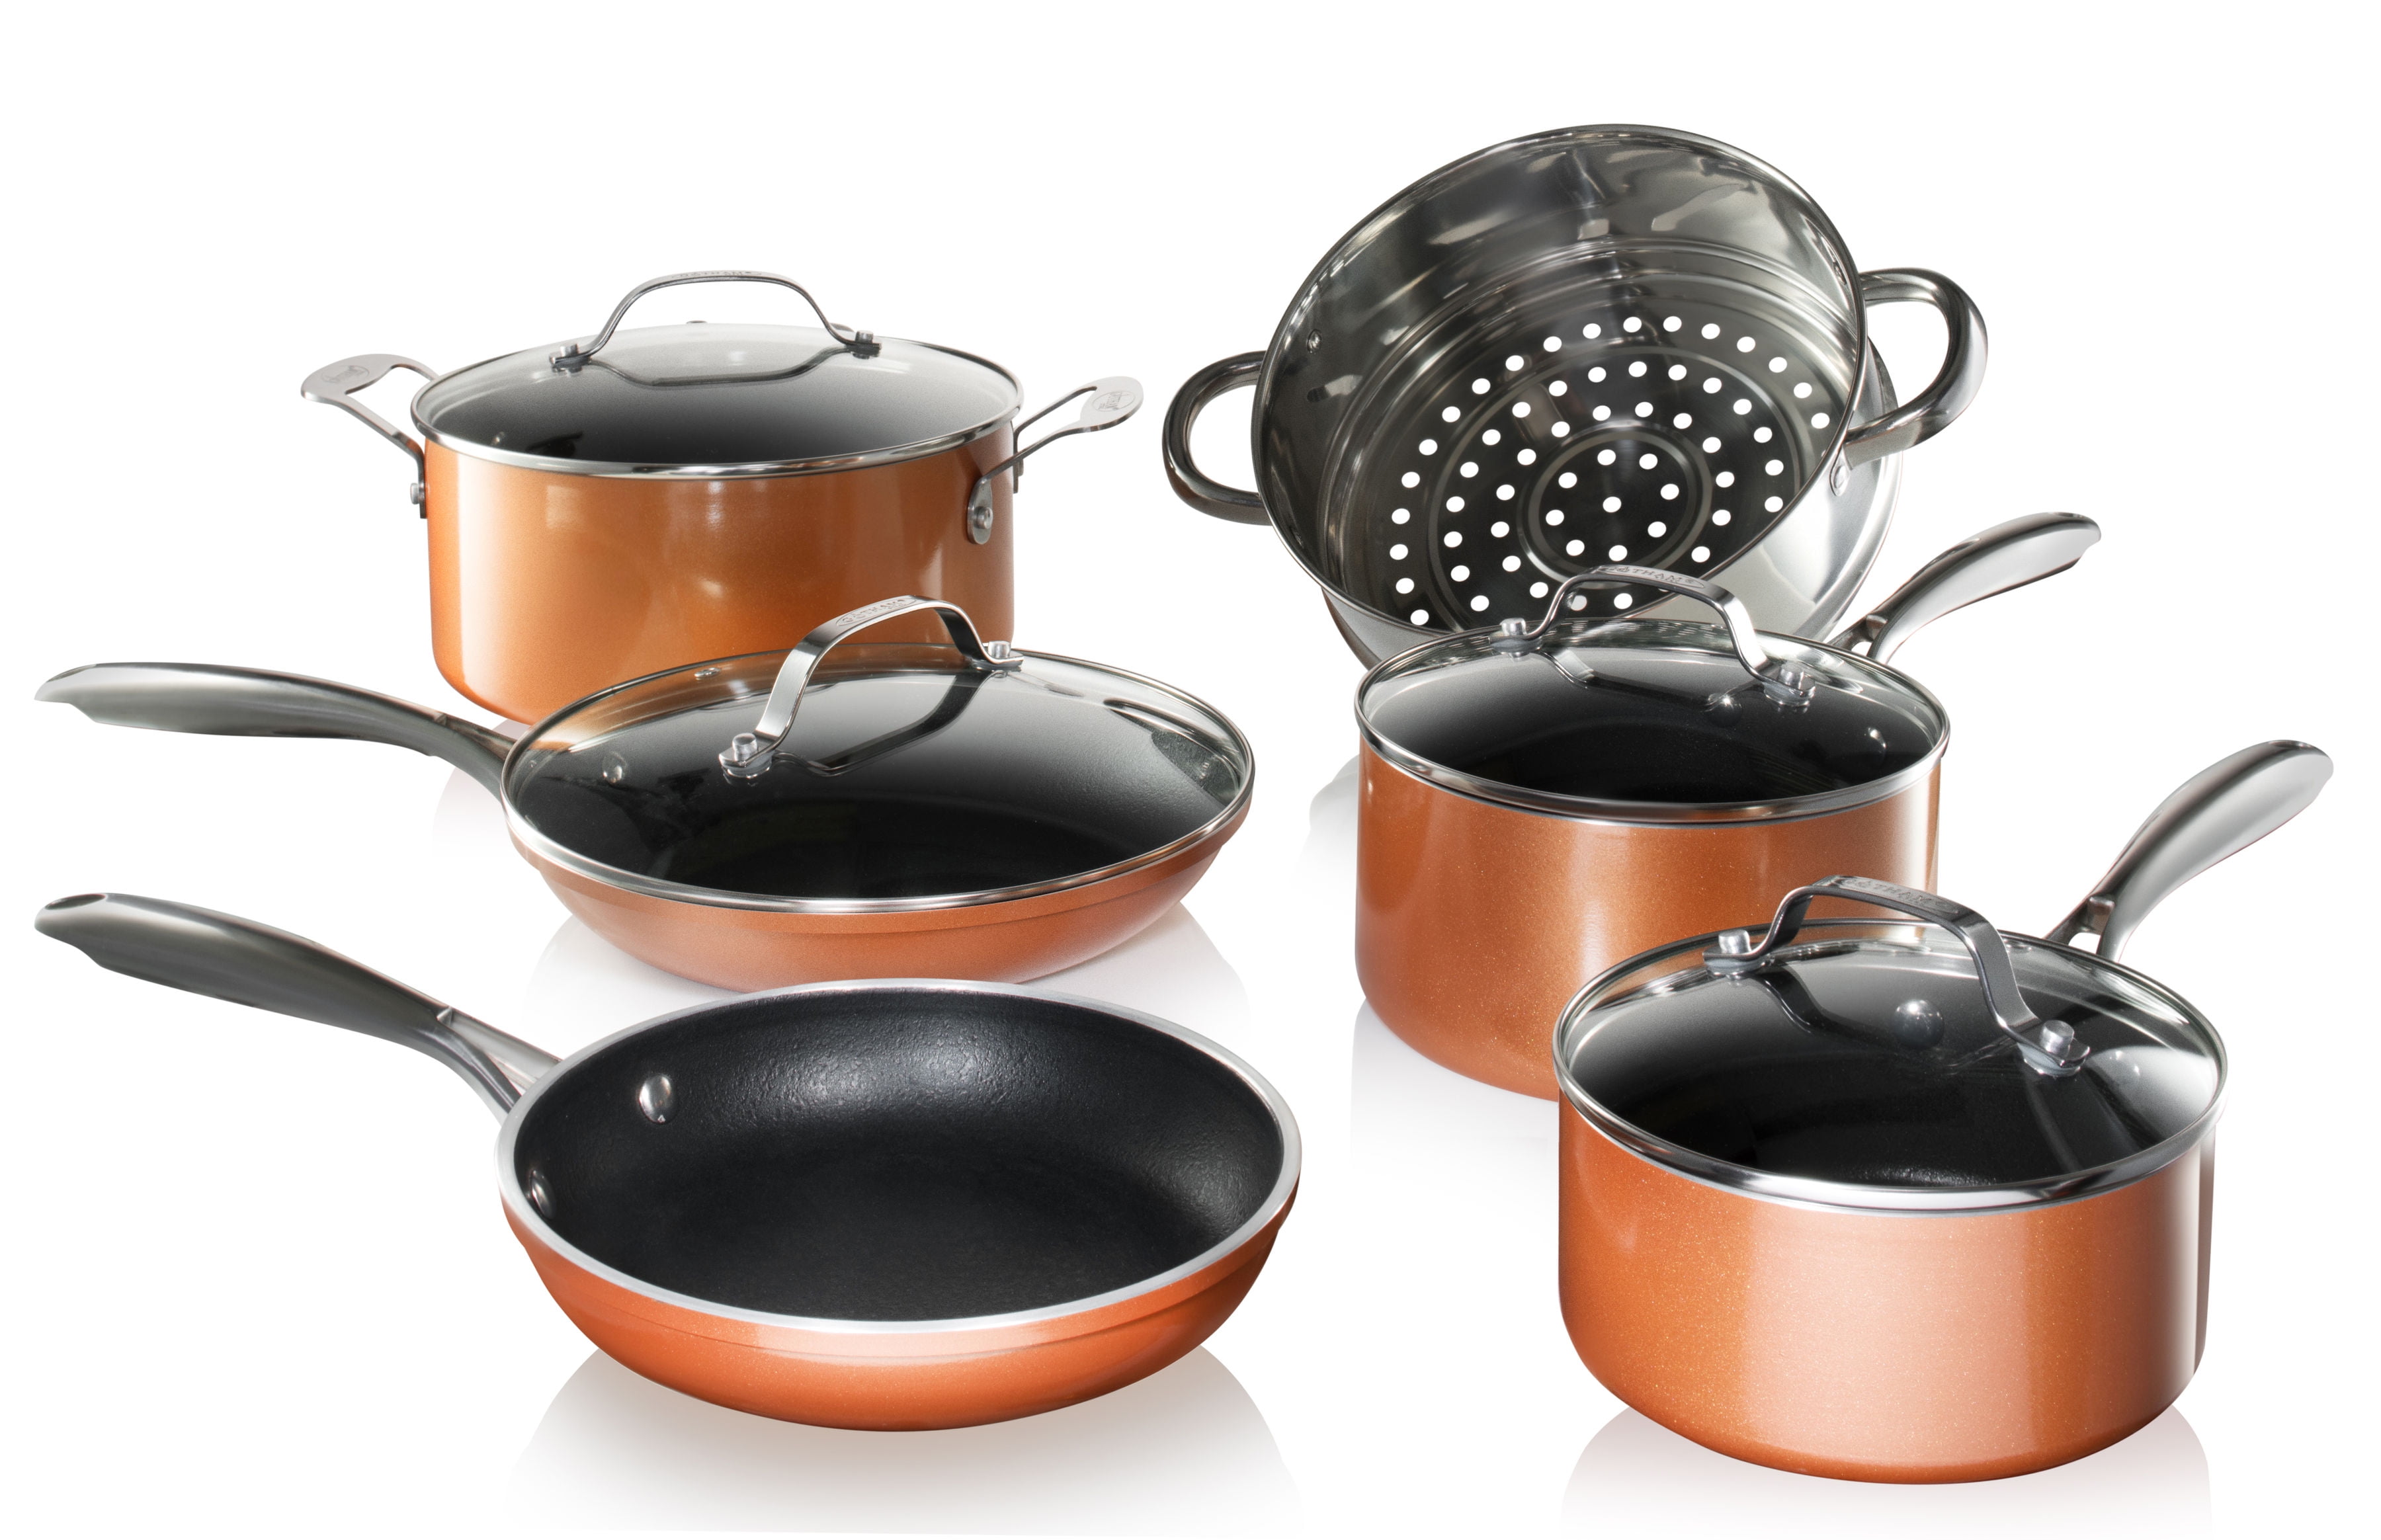 Gotham Steel Nonstick Copper Square Shallow Pan with Lids 6 Piece Cookware  Set – As Seen on TV by Chef Daniel, Green